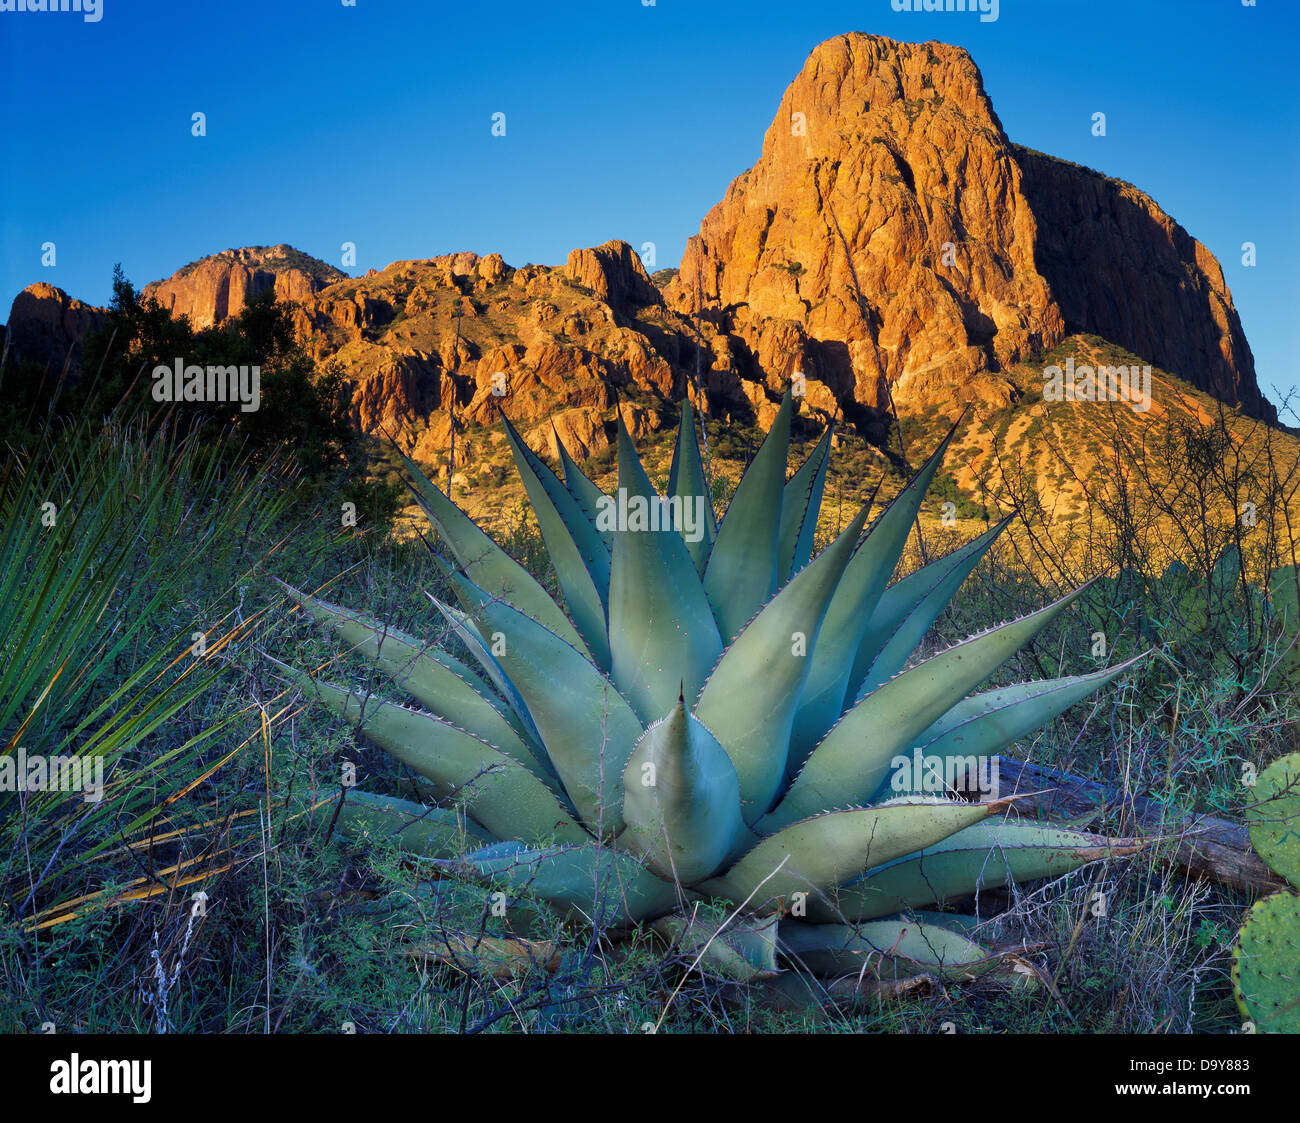 USA, Texas, Big Bend National Park, Agave or Century Plant, Agave havardiana, with Pullman Bluff of Chisos Mountains beyond Stock Photo